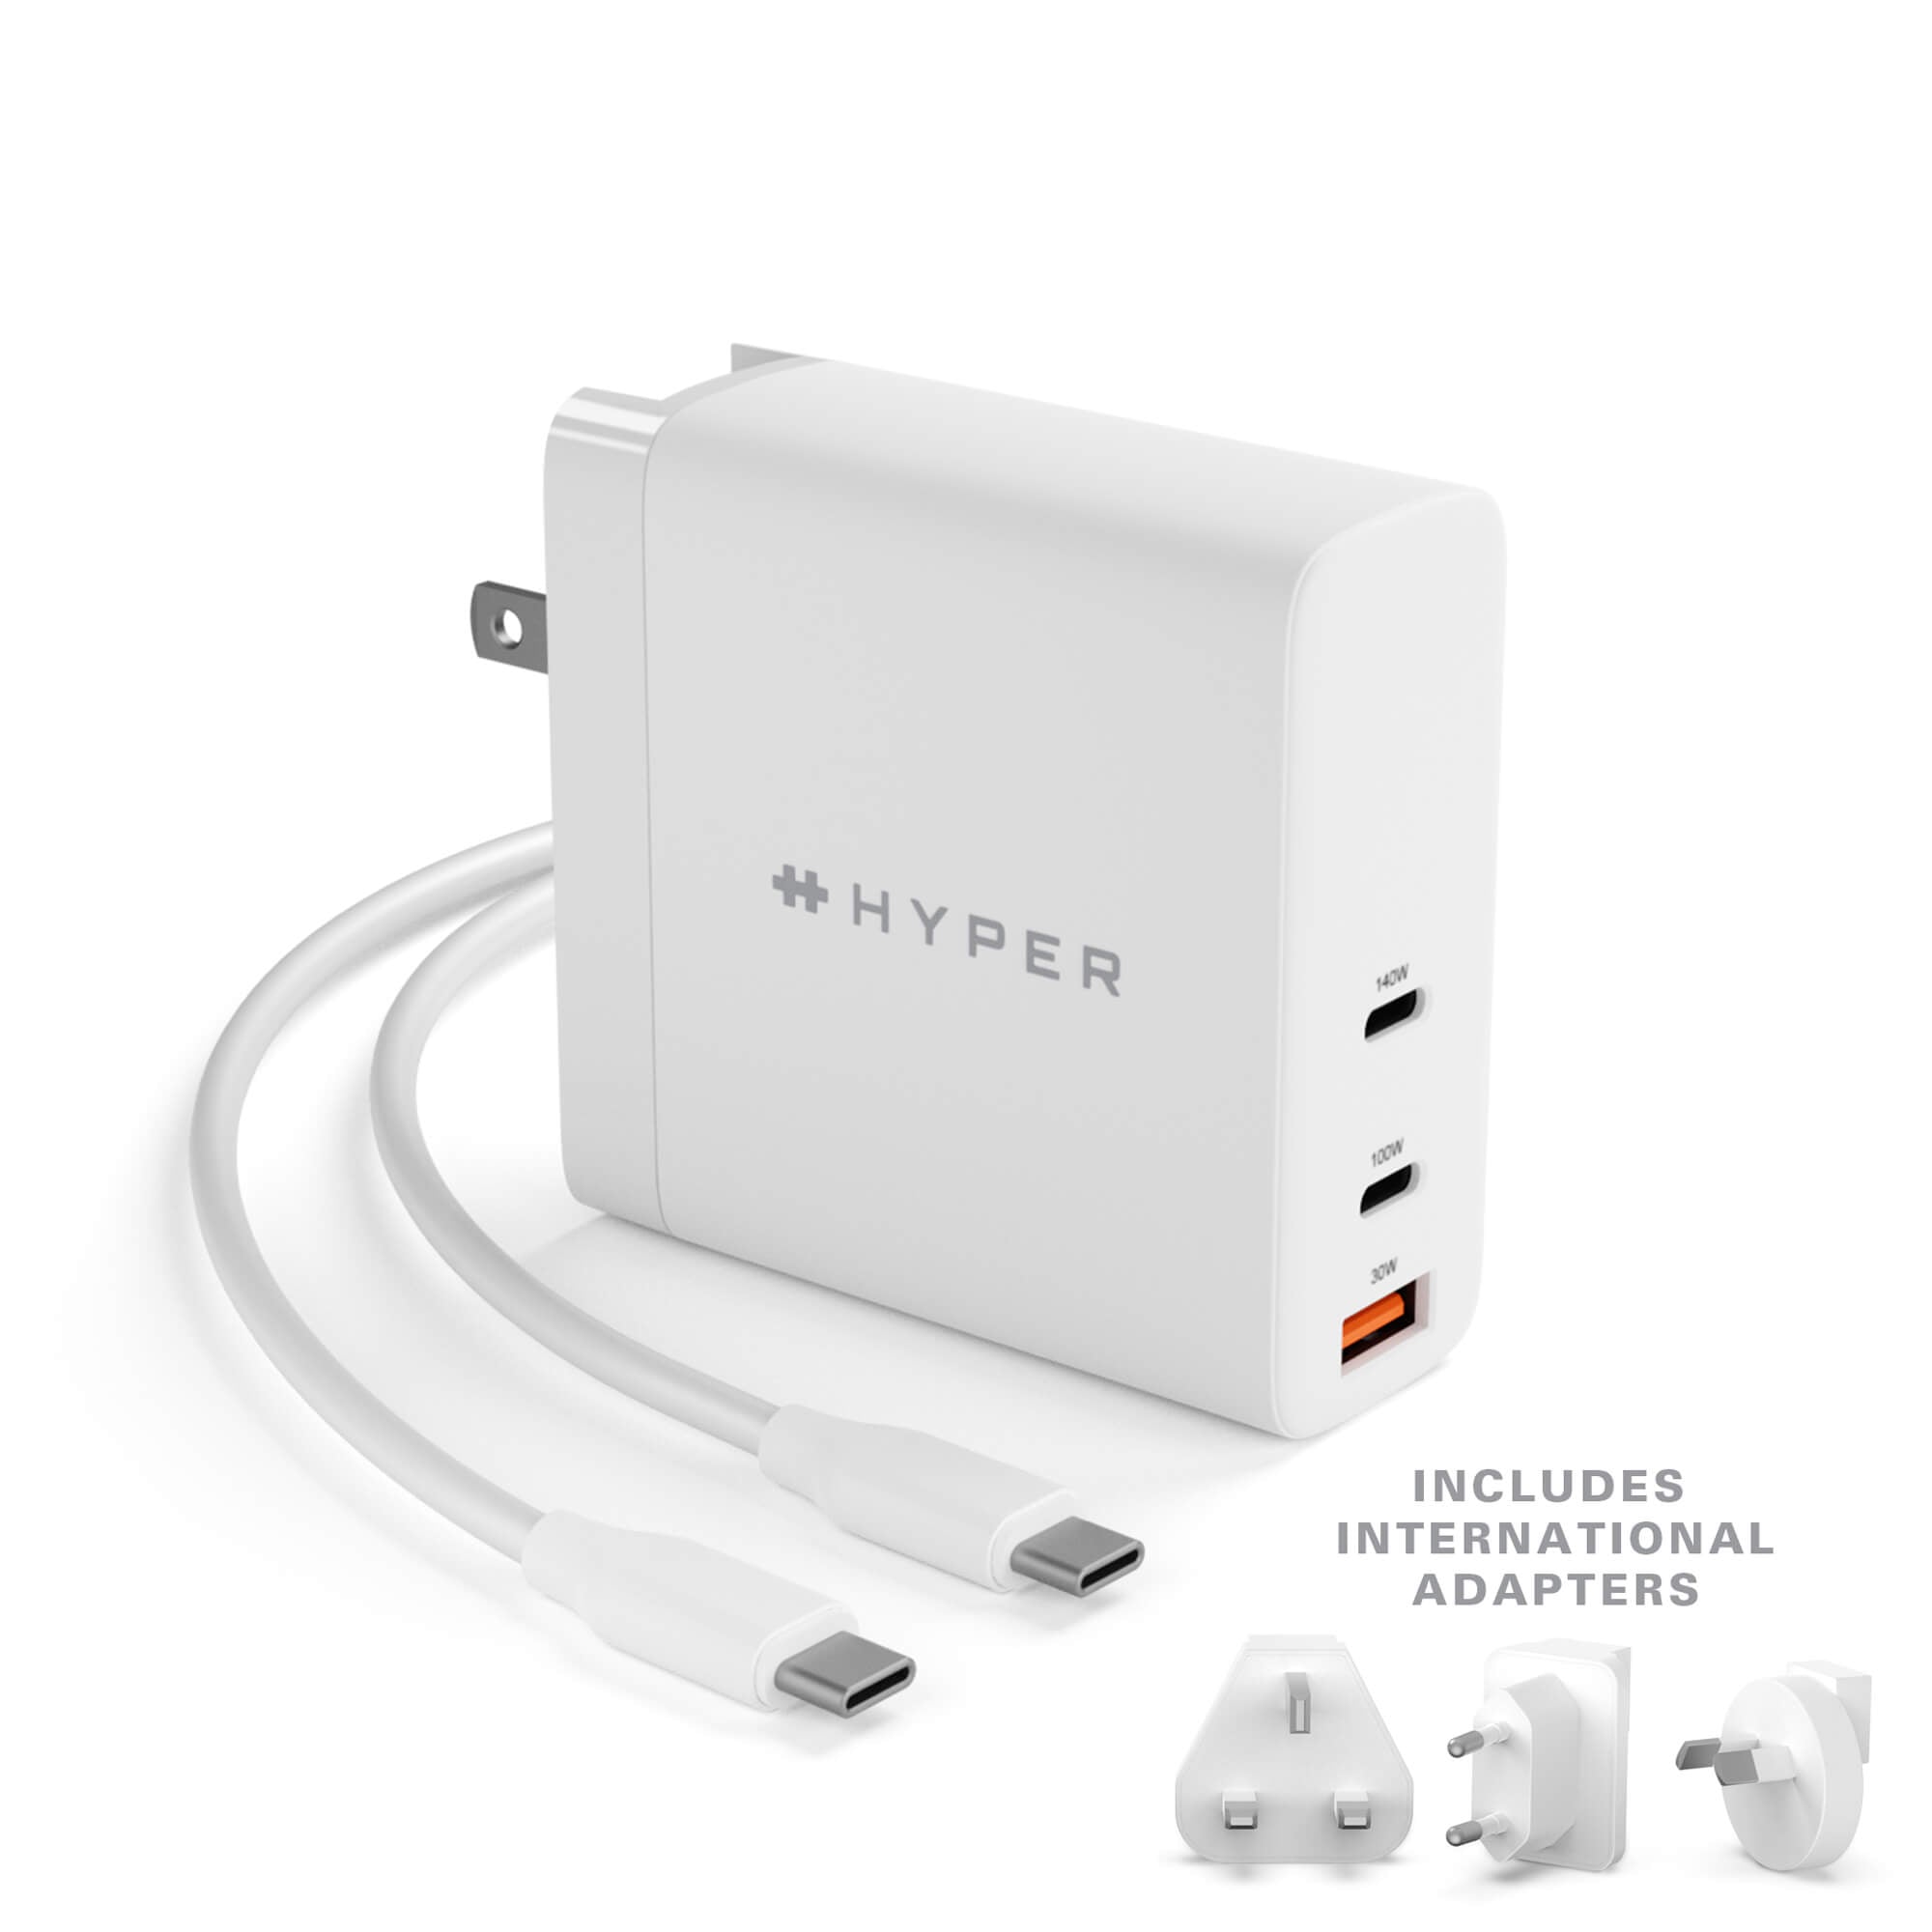 This powerful 140W USB-C charger is smaller than Apple's and has